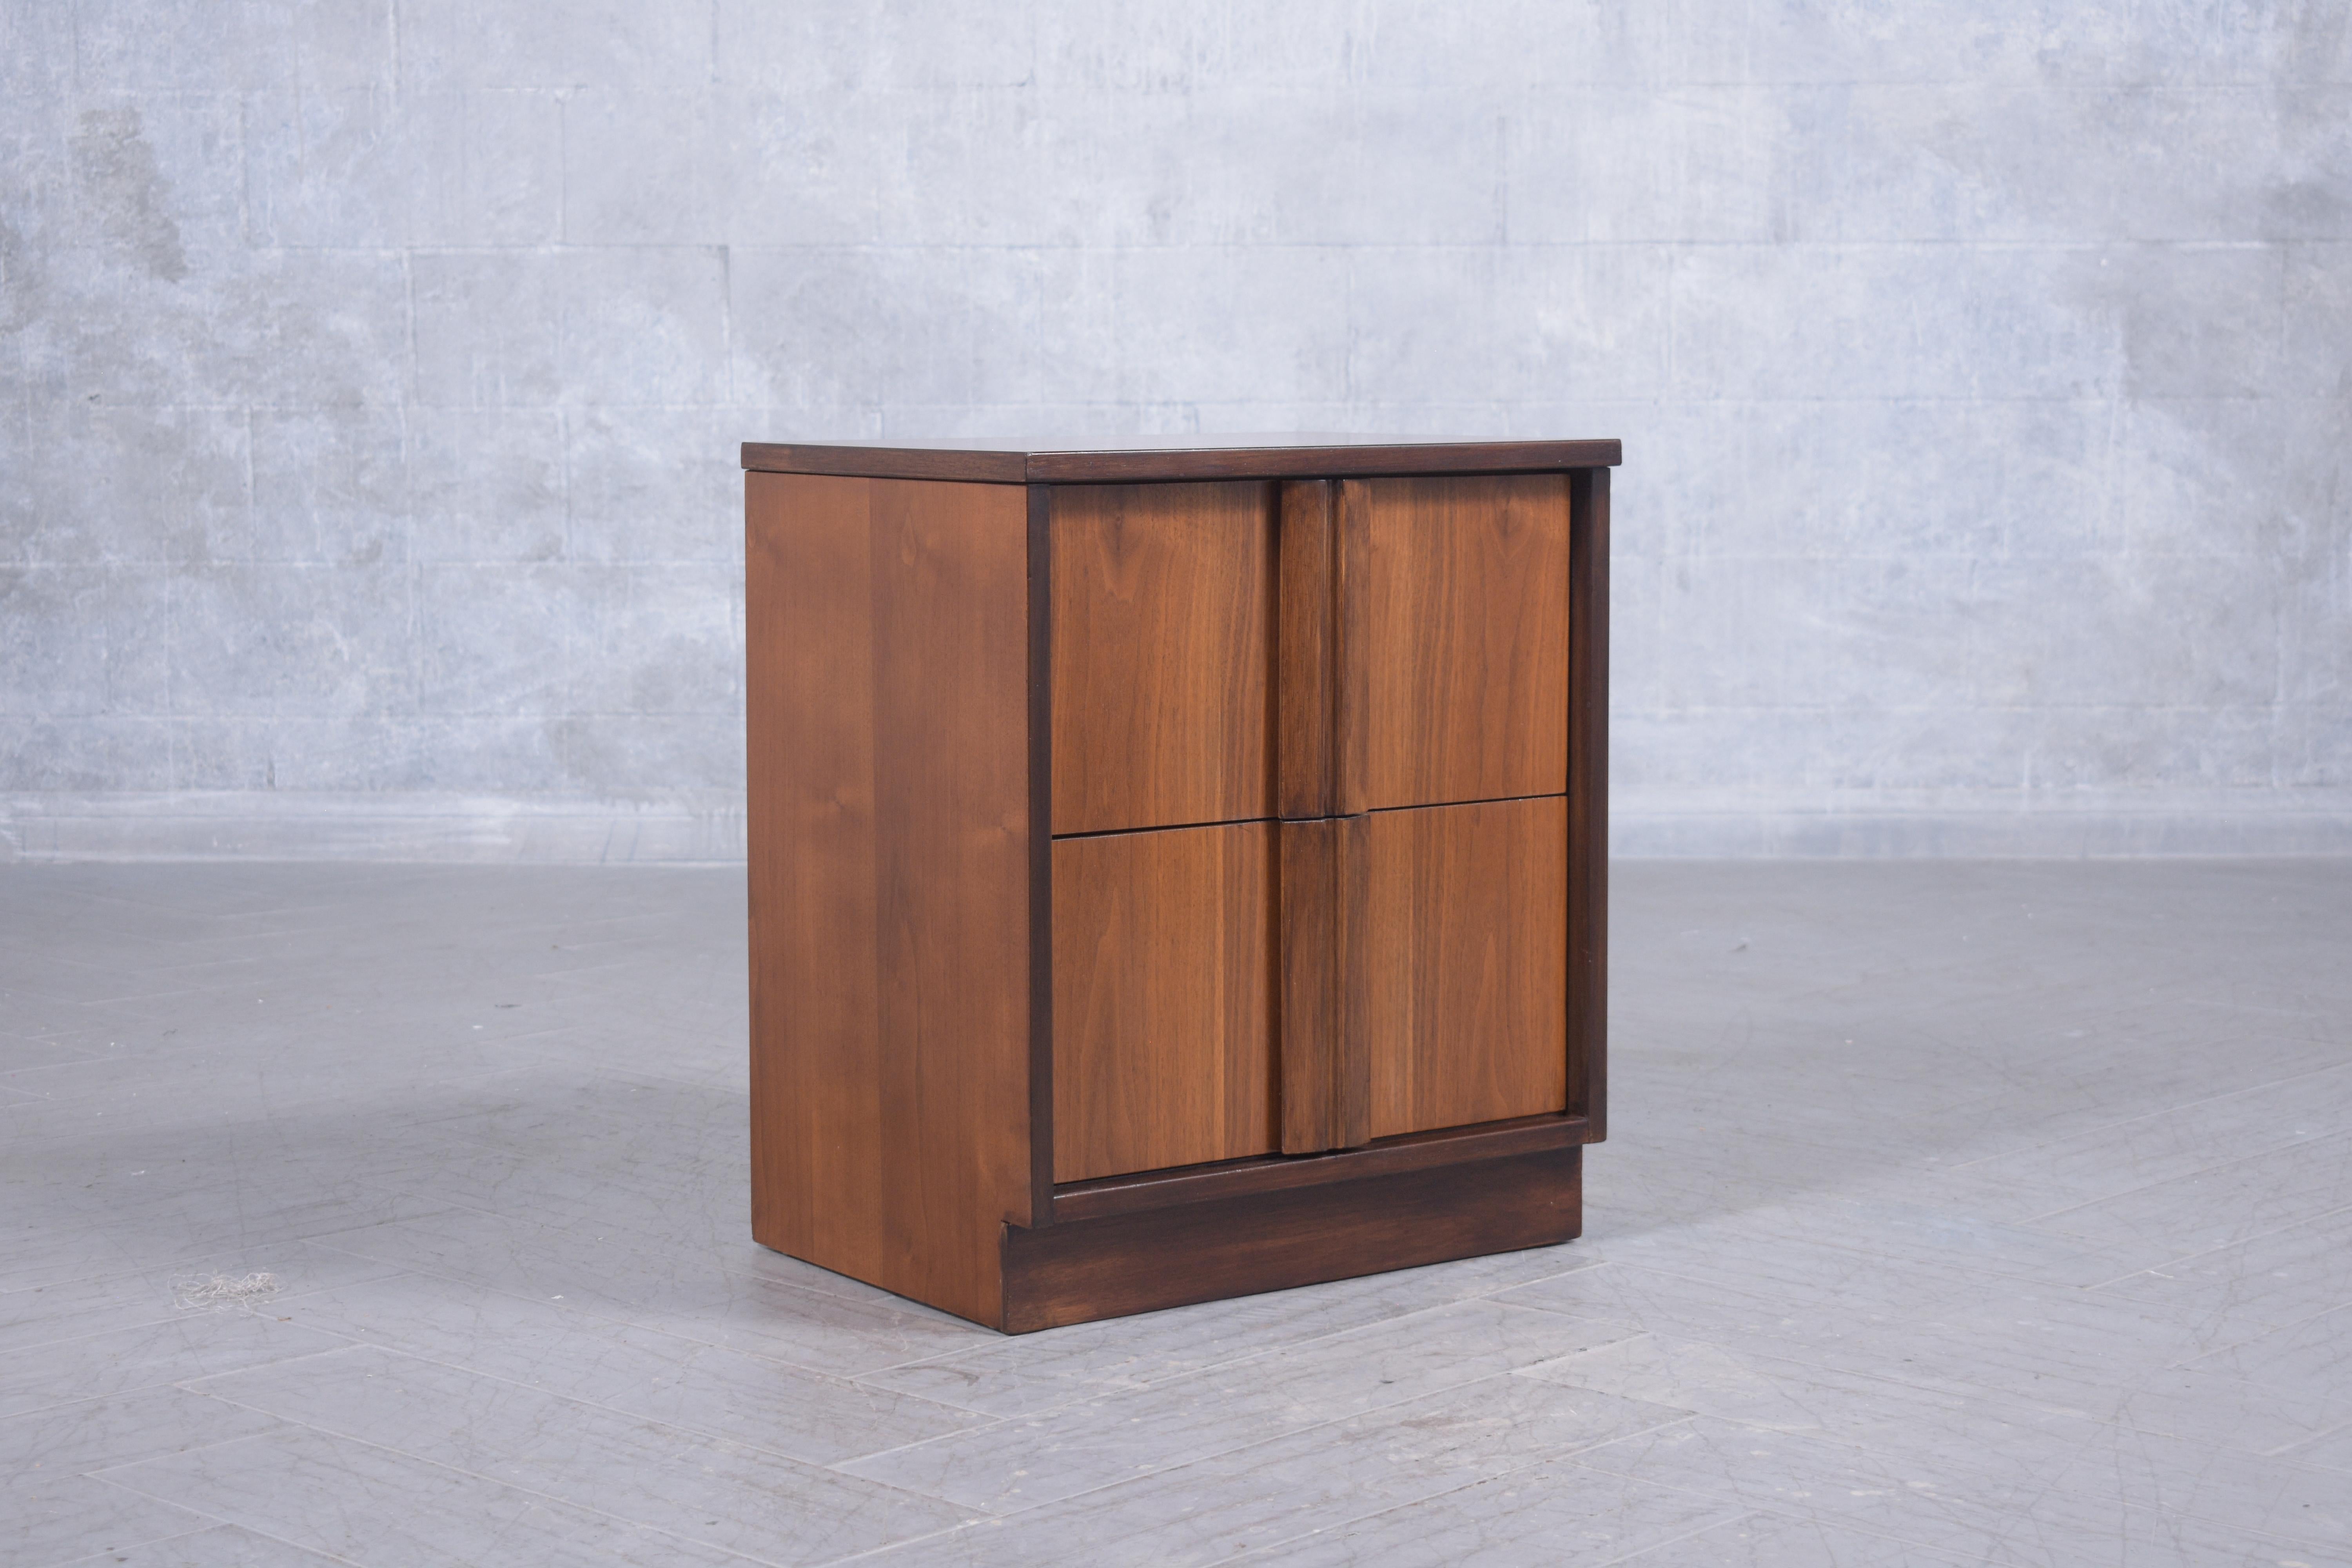 Mid-20th Century Restored 1960s Modern Walnut Nightstand: Dual-Tone with Unique Carved Handle For Sale